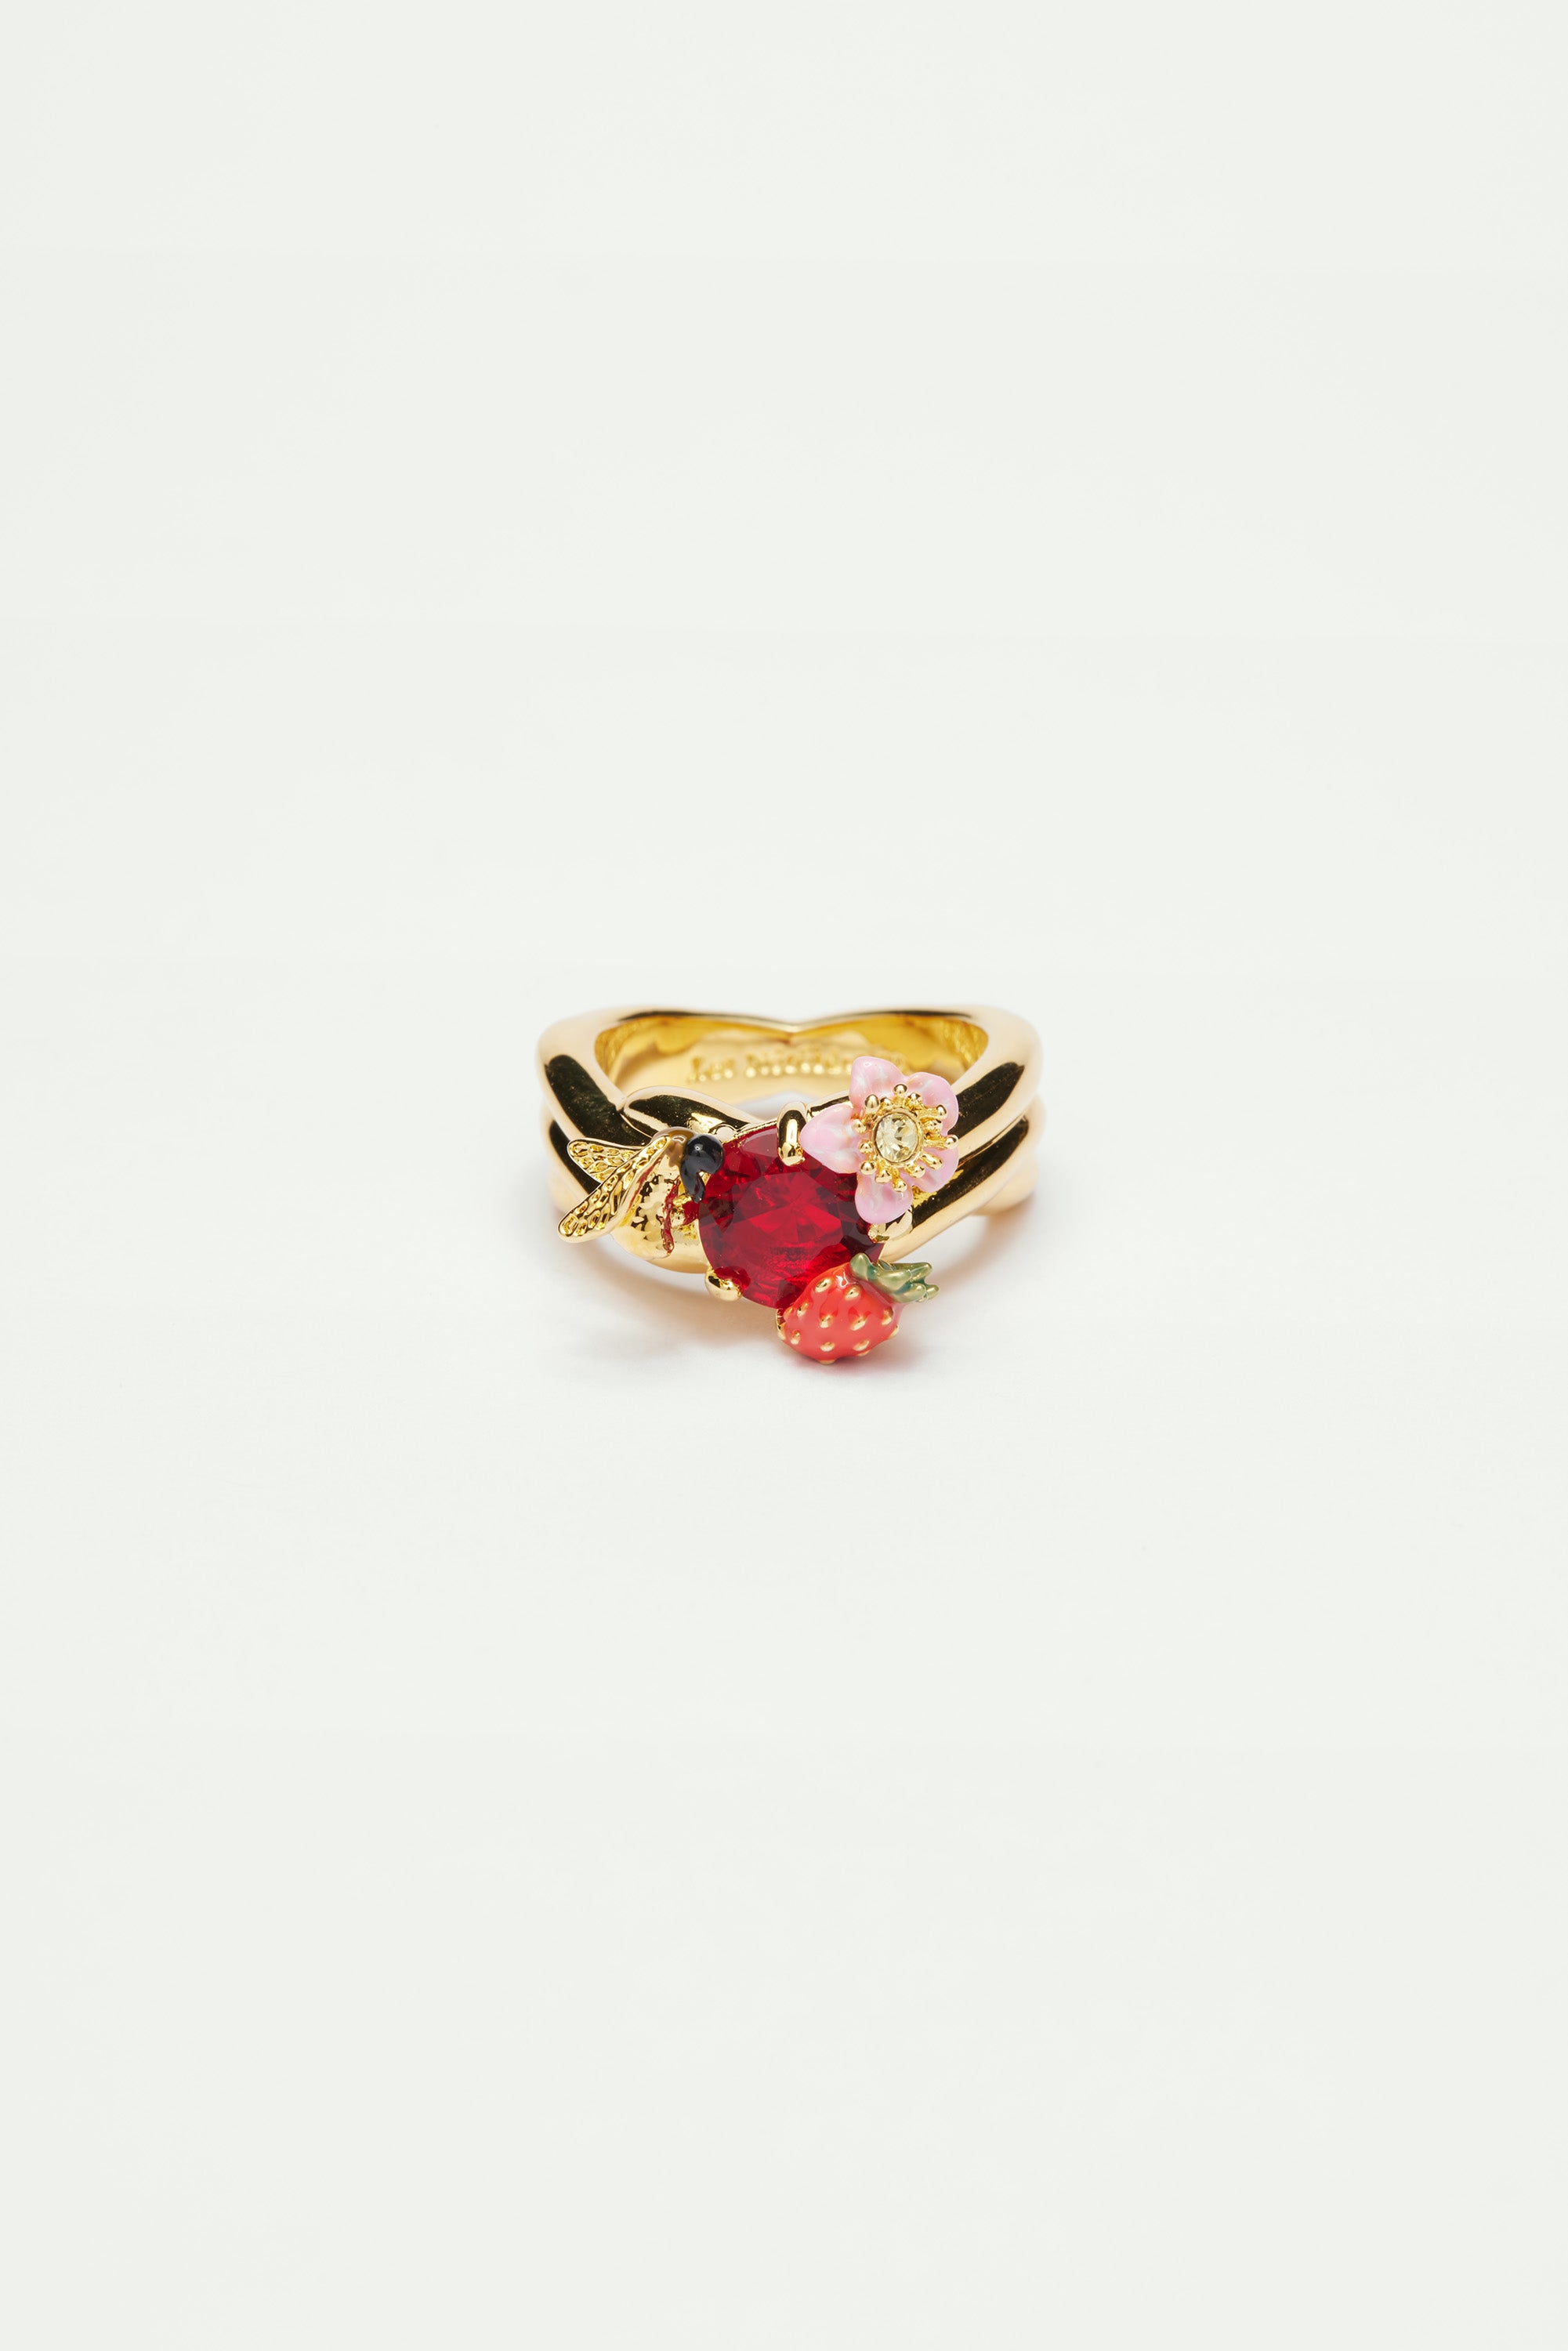 Wild strawberry, bumblebee and round stone cocktail ring